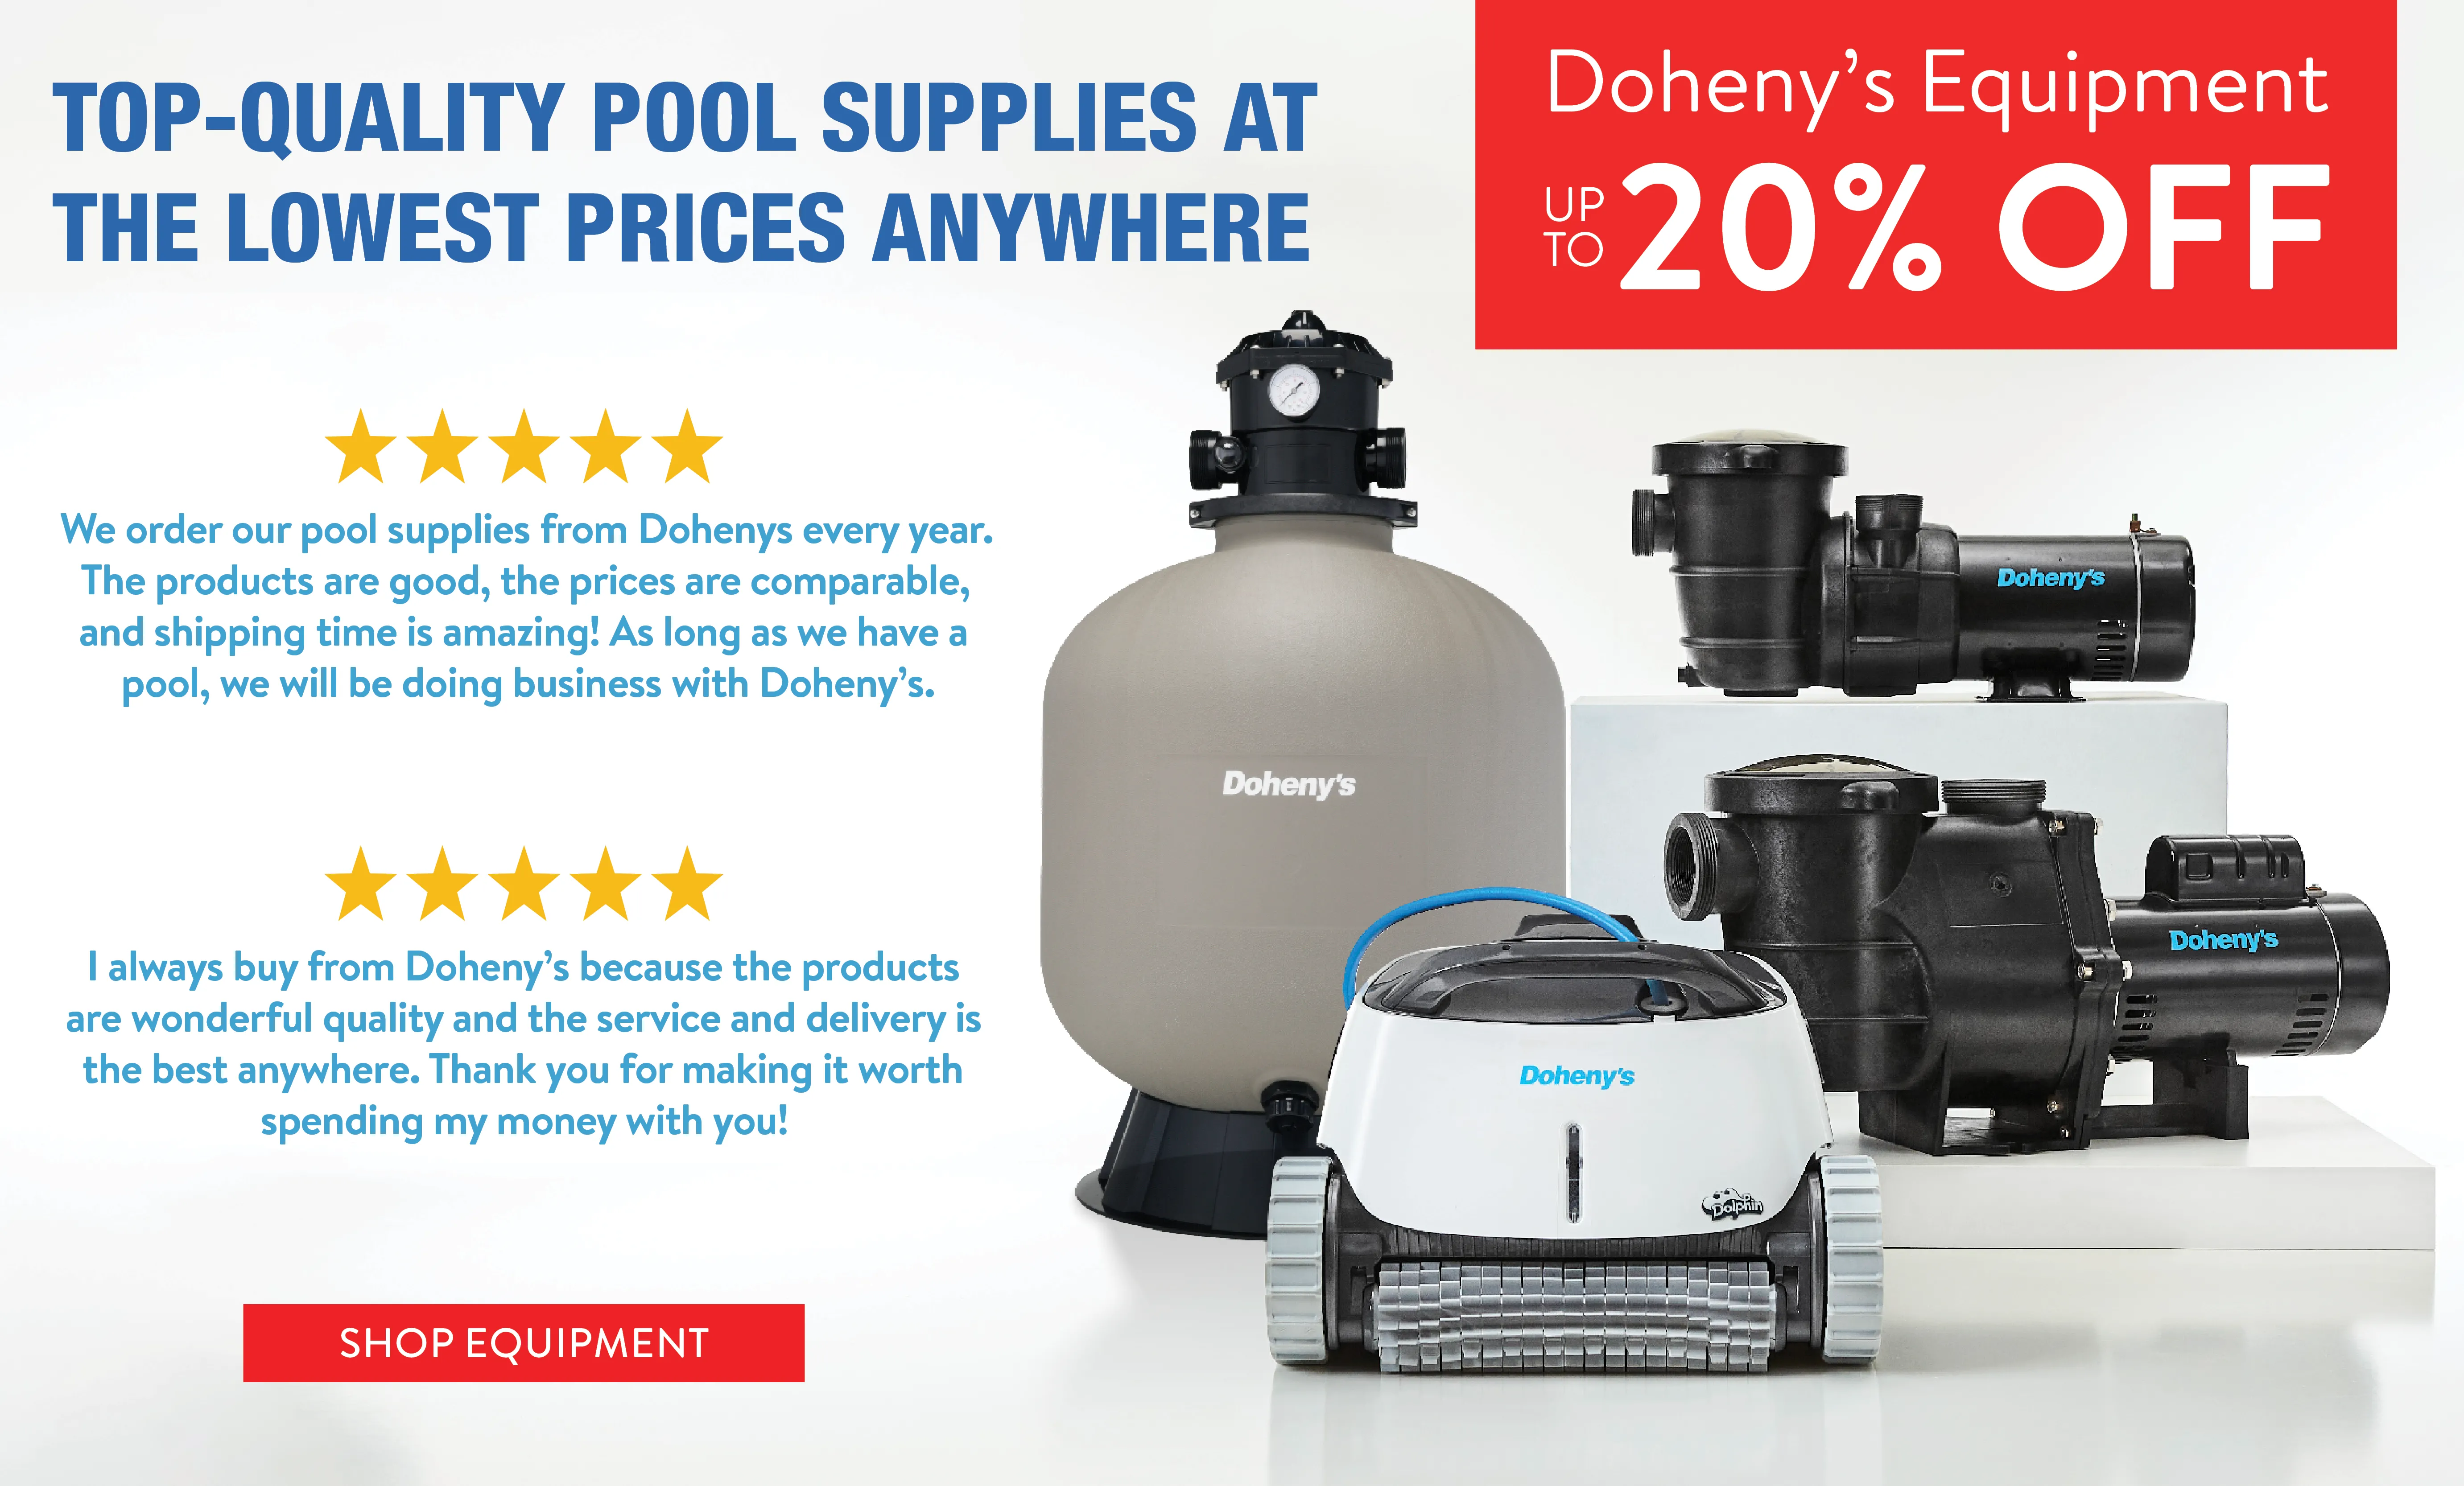 Doheny's Equipment up to 20% OFF! Top-Quality Pool Supplies at the Lowest Prices Anywhere. Shop Equipment Now.